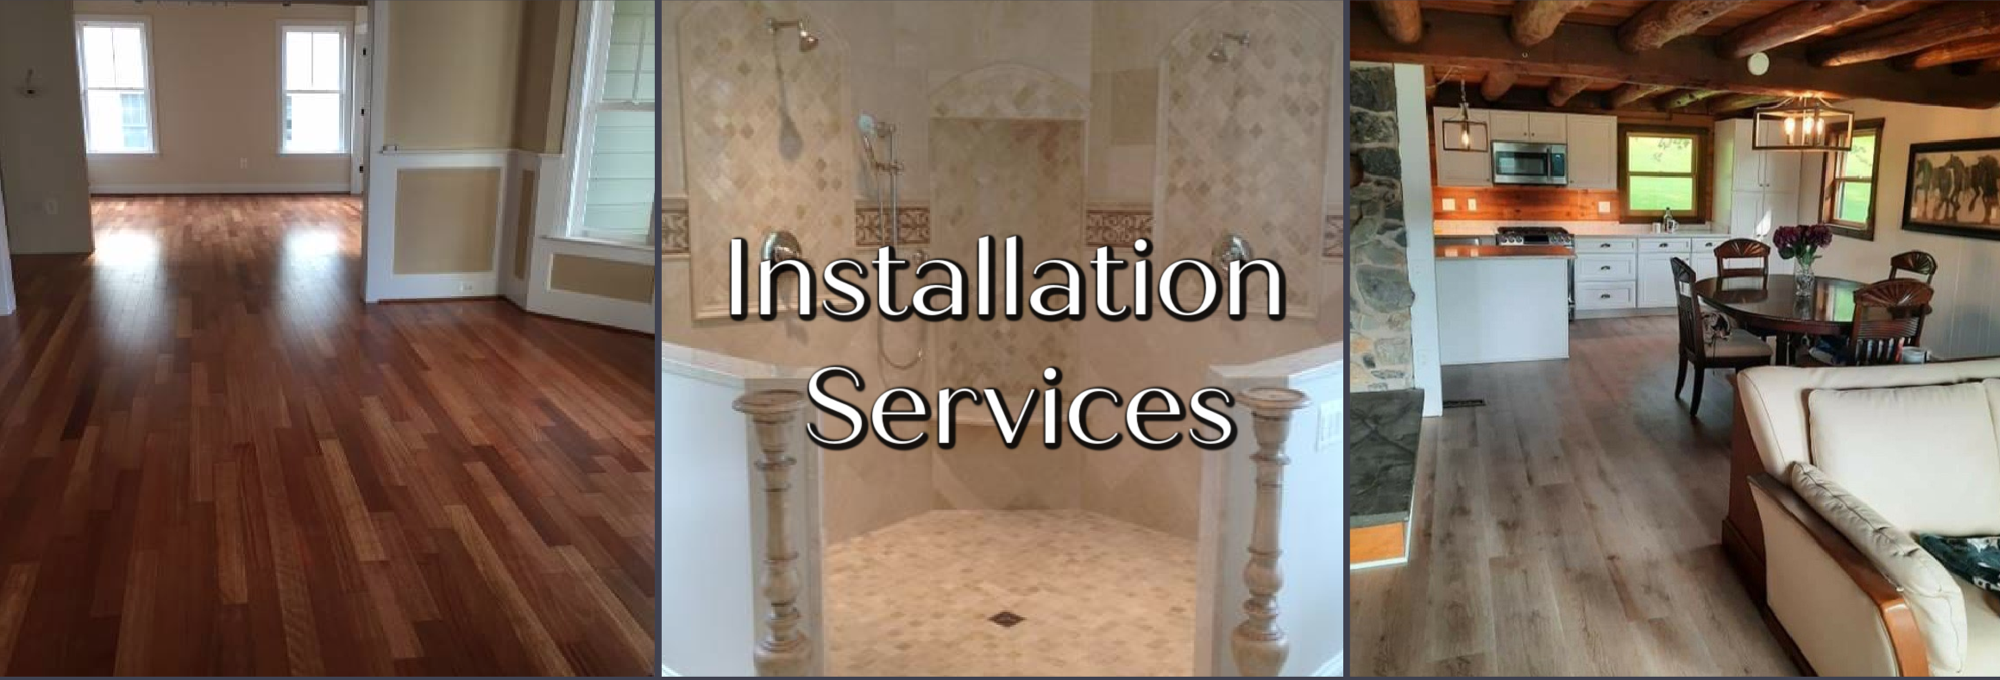 A living room, bathroom and a kitchen with flooring and tile installations from Flooring Now in Manassas, VA